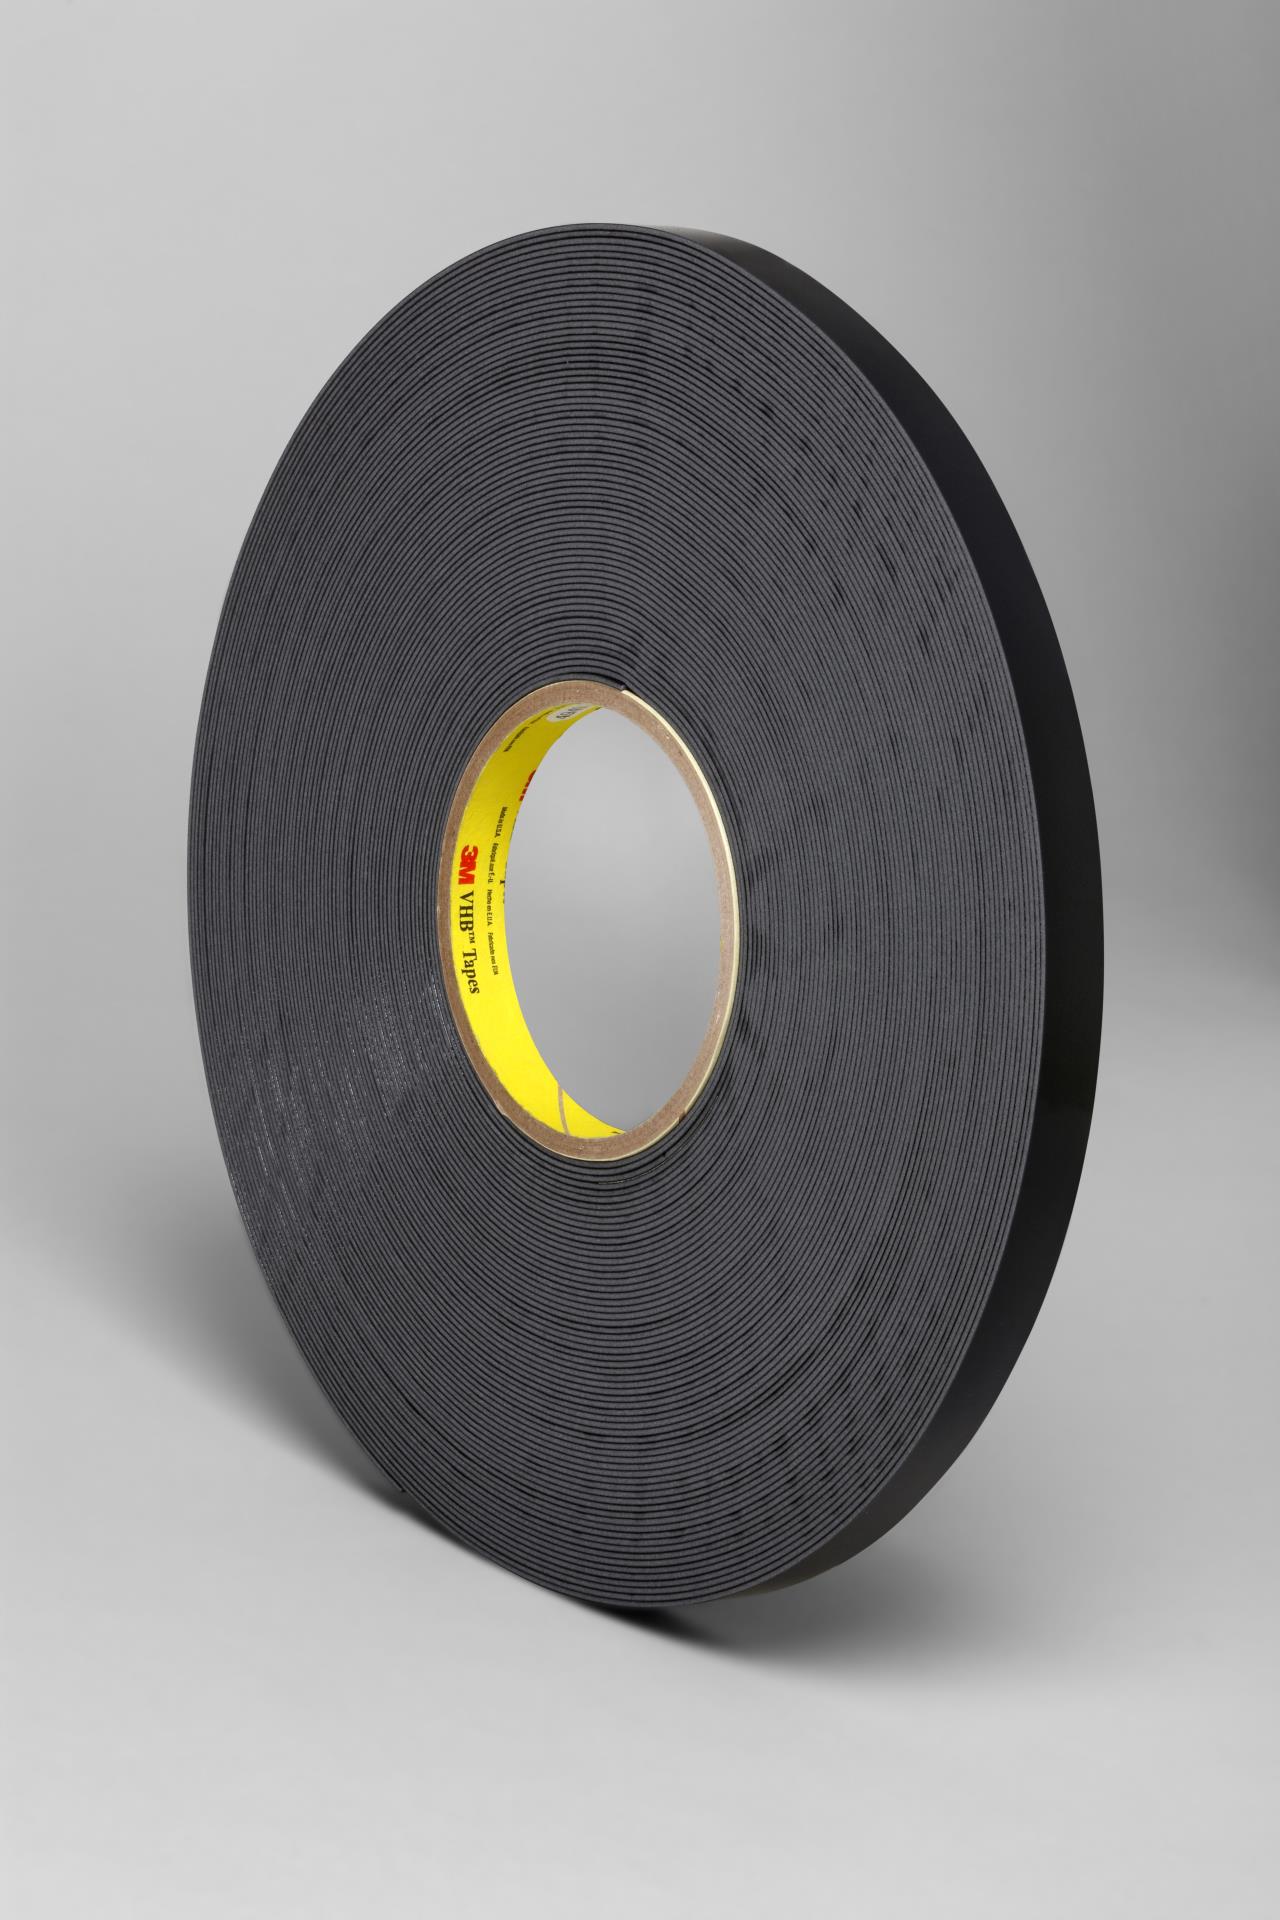 Scotch 3M 860 Tensilized Strapping Tape ½ in x 72 yd Black 